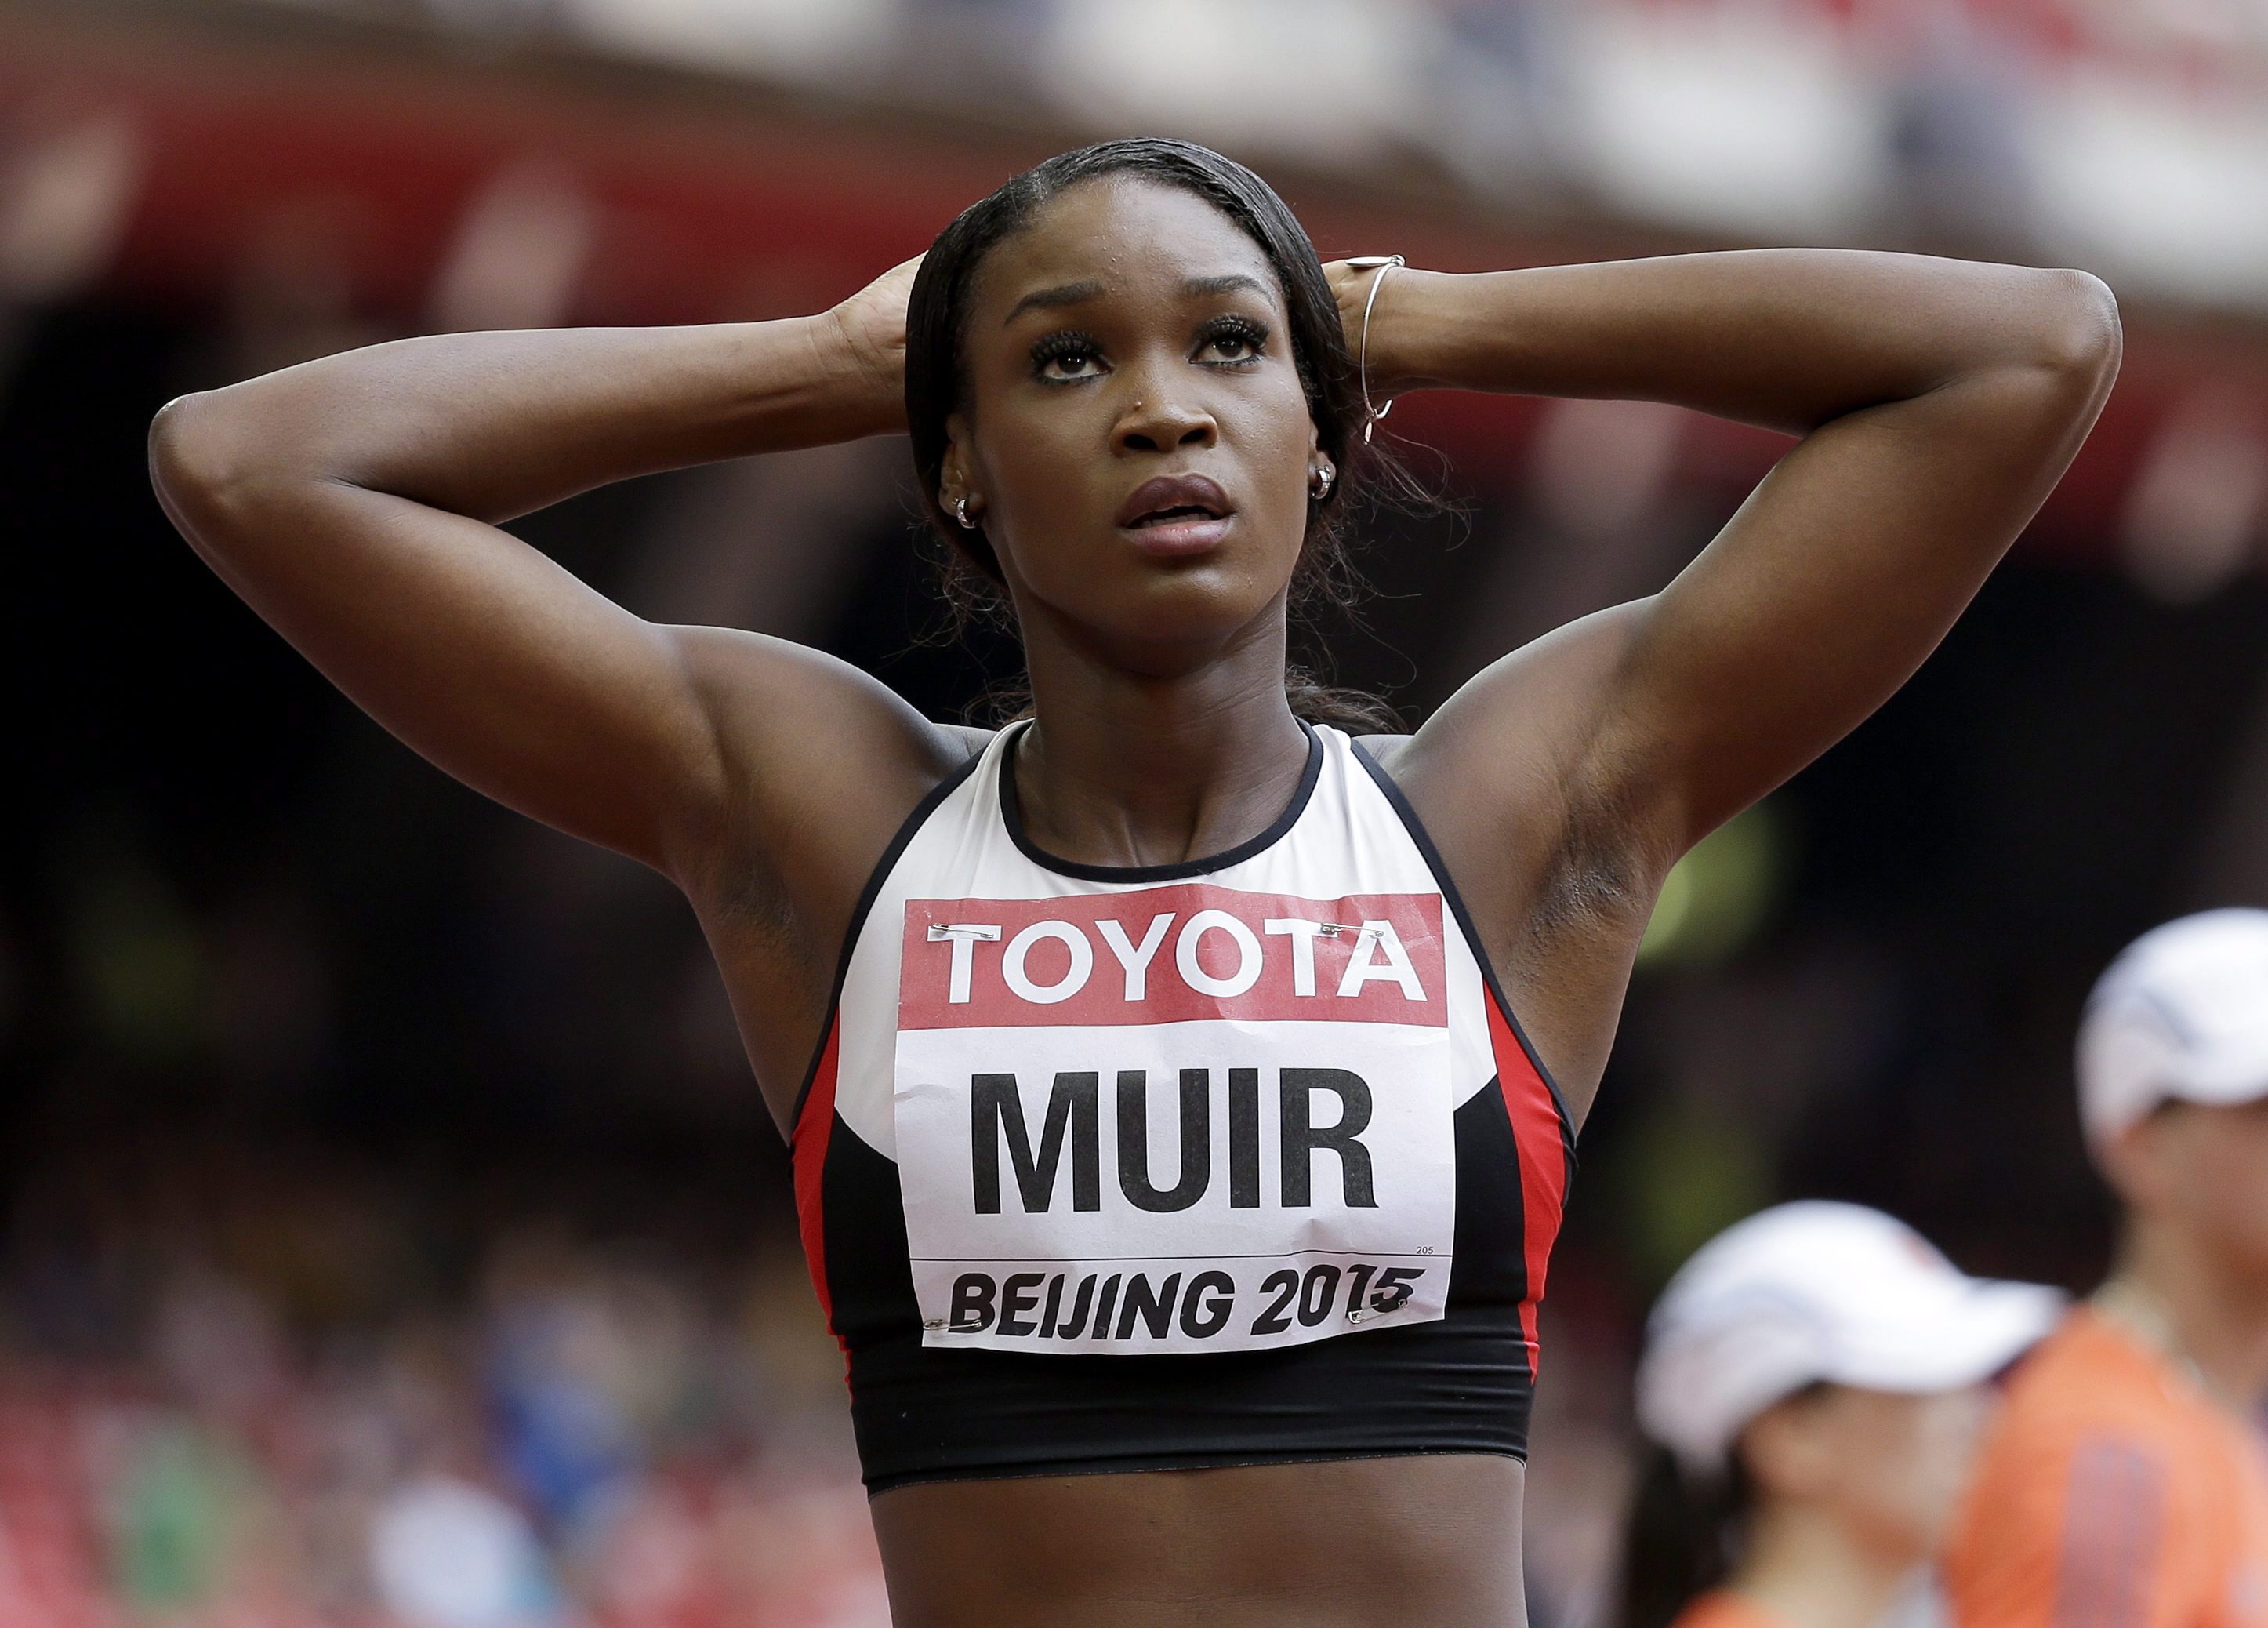 Canada's Carline Muir looks at her time following her heat of the womens 400m at the World Athletics Championships at the Bird's Nest stadium in Beijing, Monday, Aug. 24, 2015. (AP Photo/David J. Phillip)